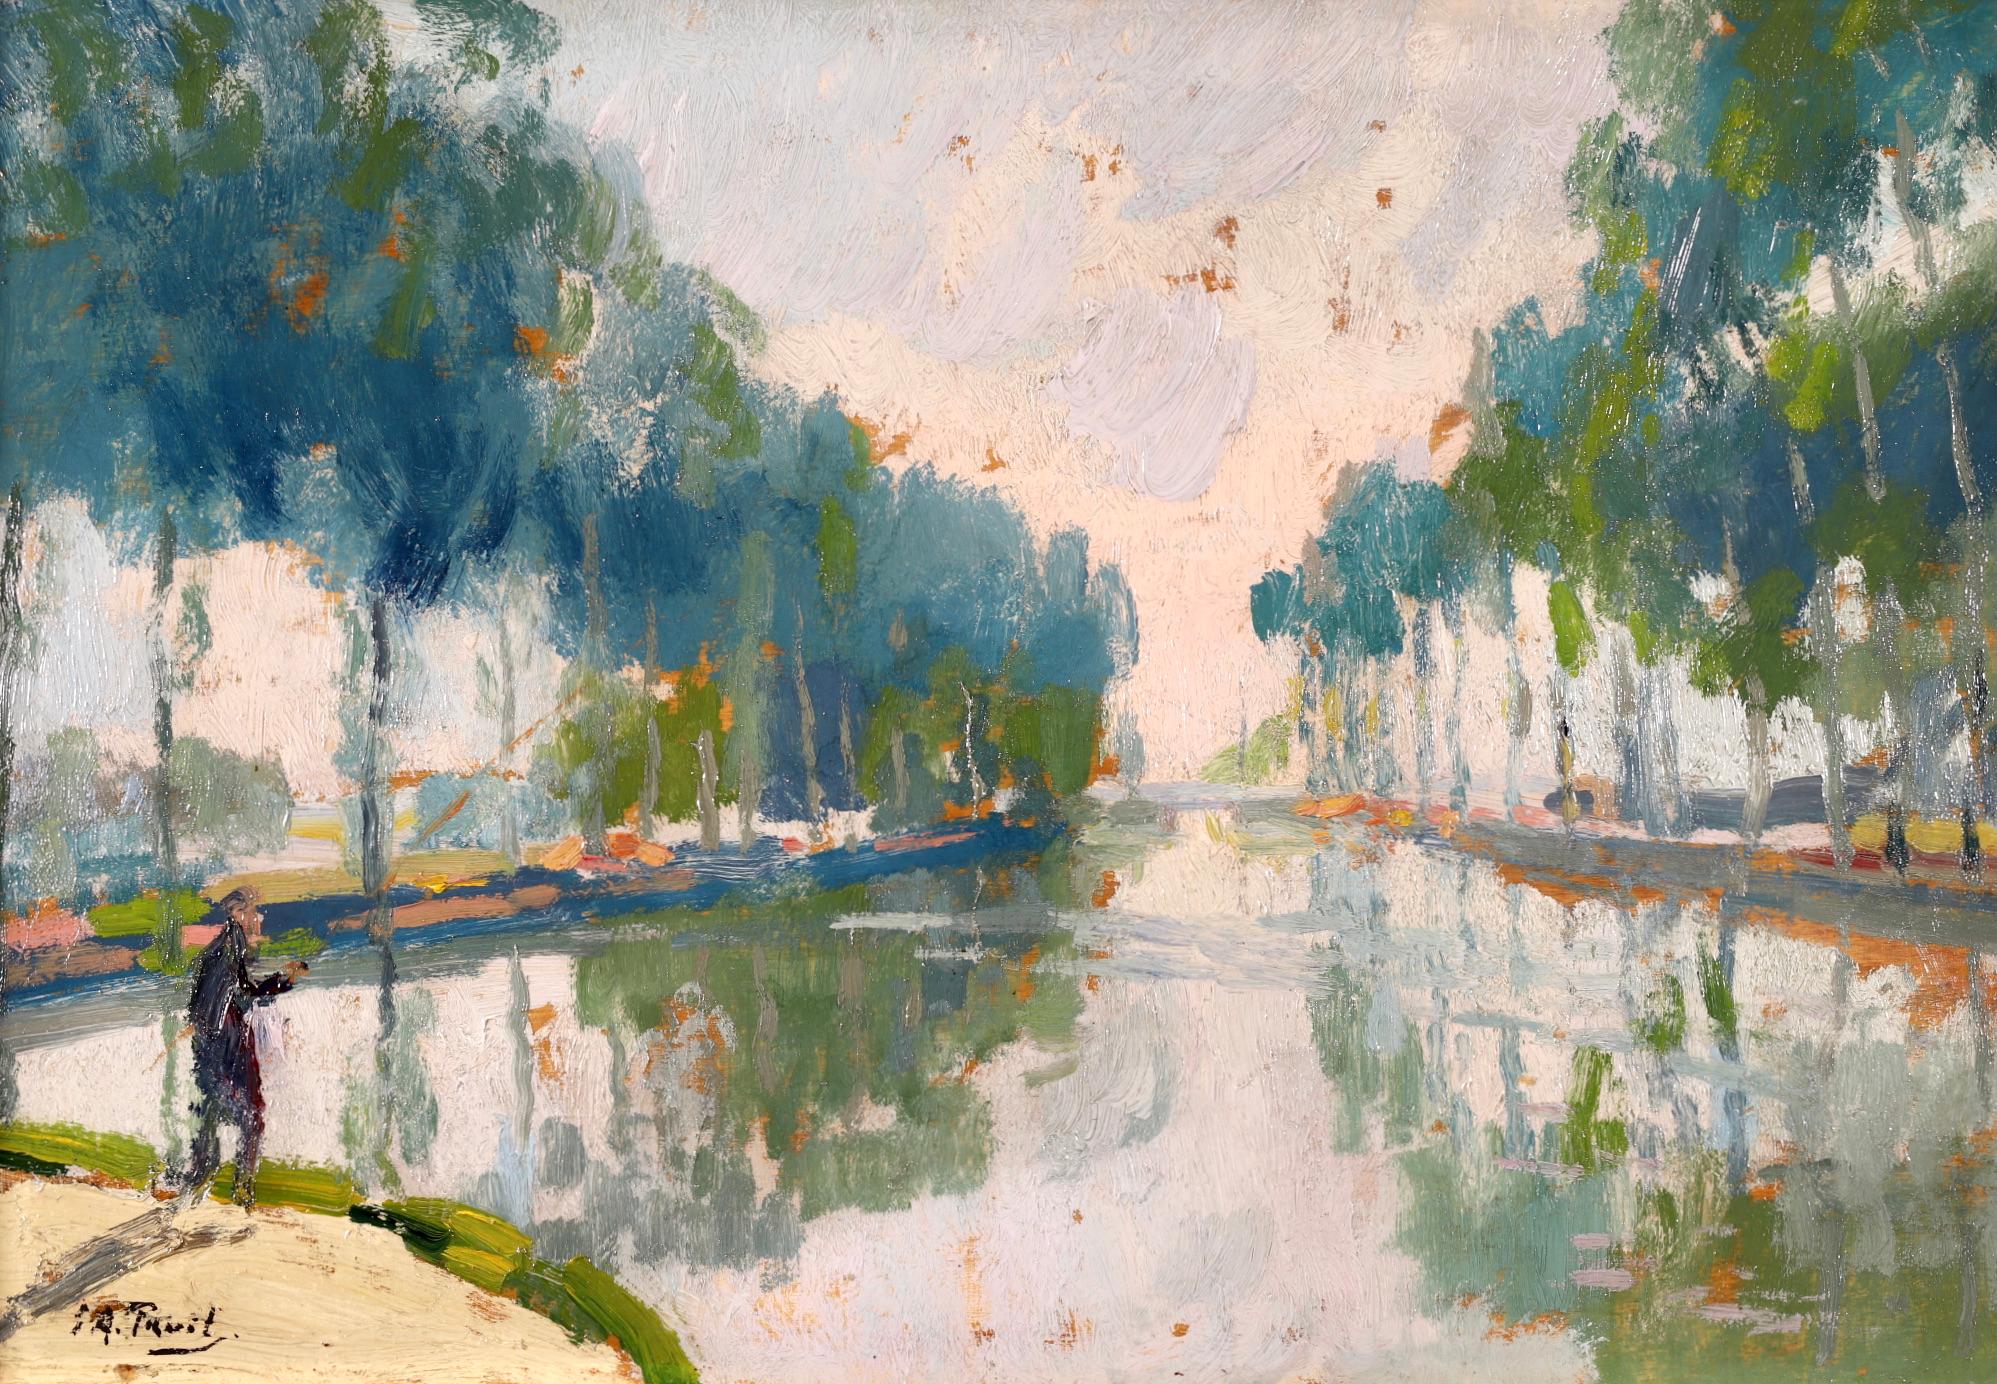  Fishing on the Seine - Post Impressionist Oil, River Landscape by Elie A Pavil - Painting by Elie Anatole Pavil